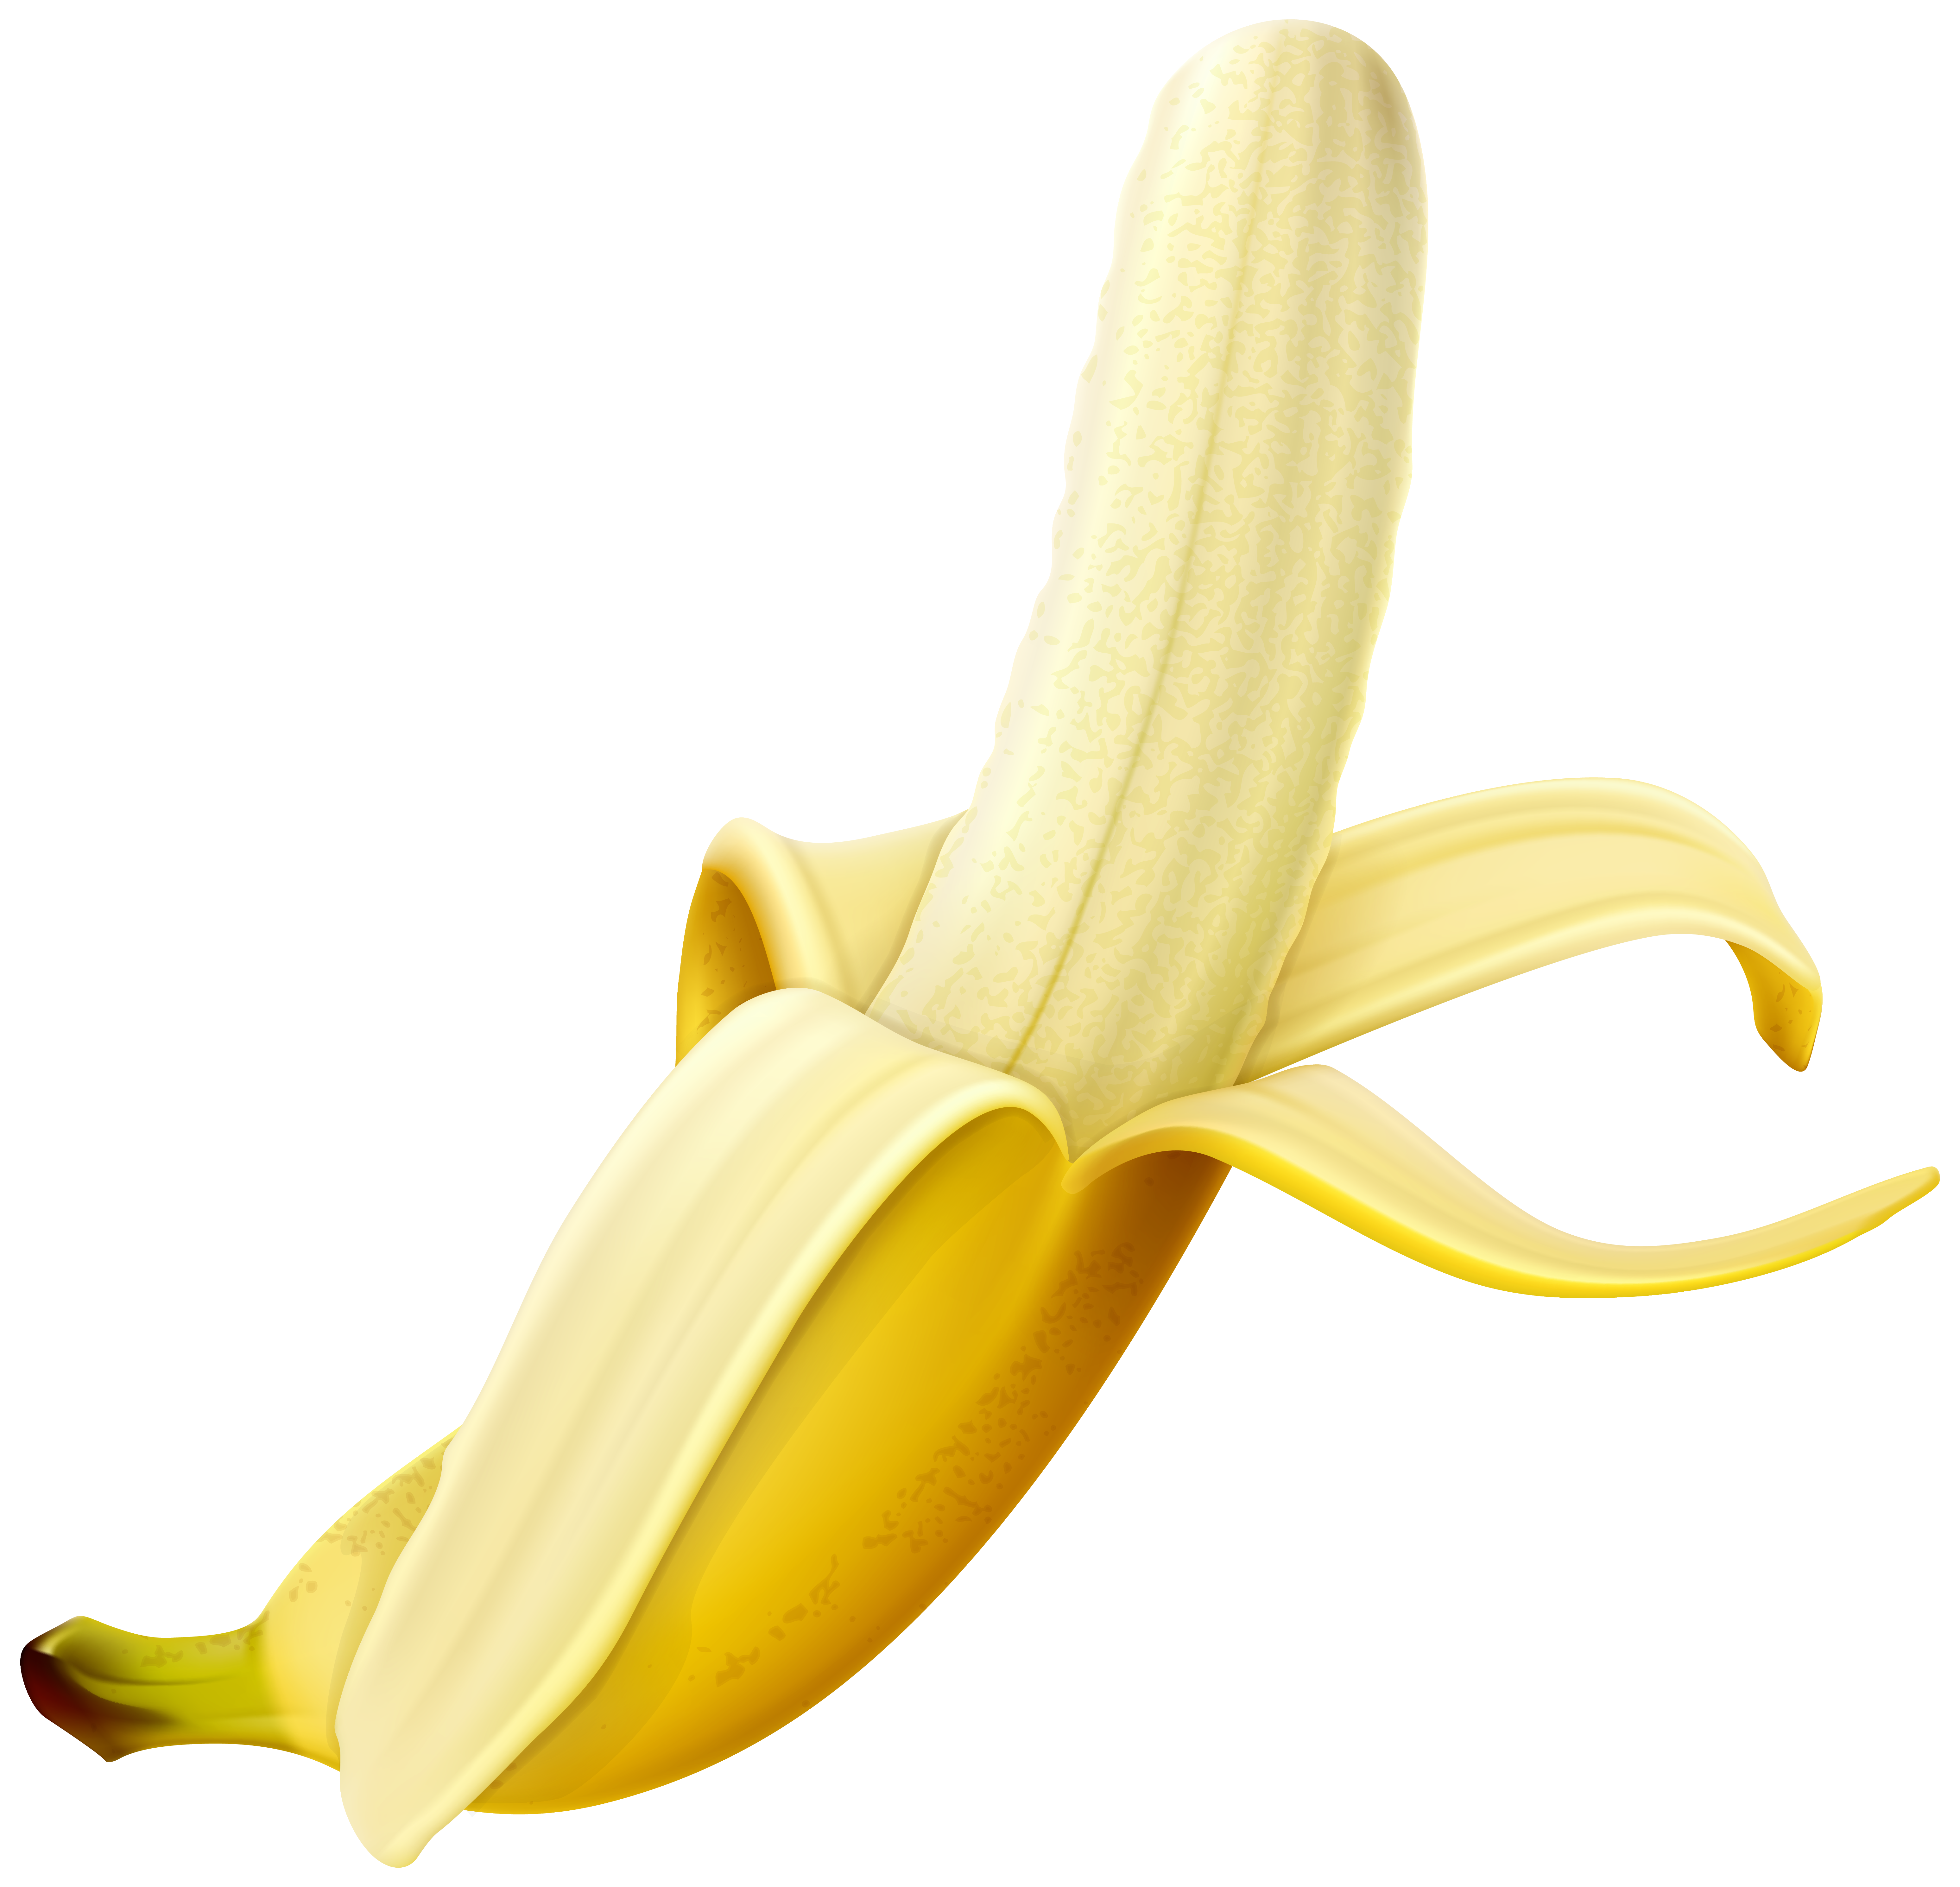 Peeled Banana PNG Clipart Image | Gallery Yopriceville - High ...